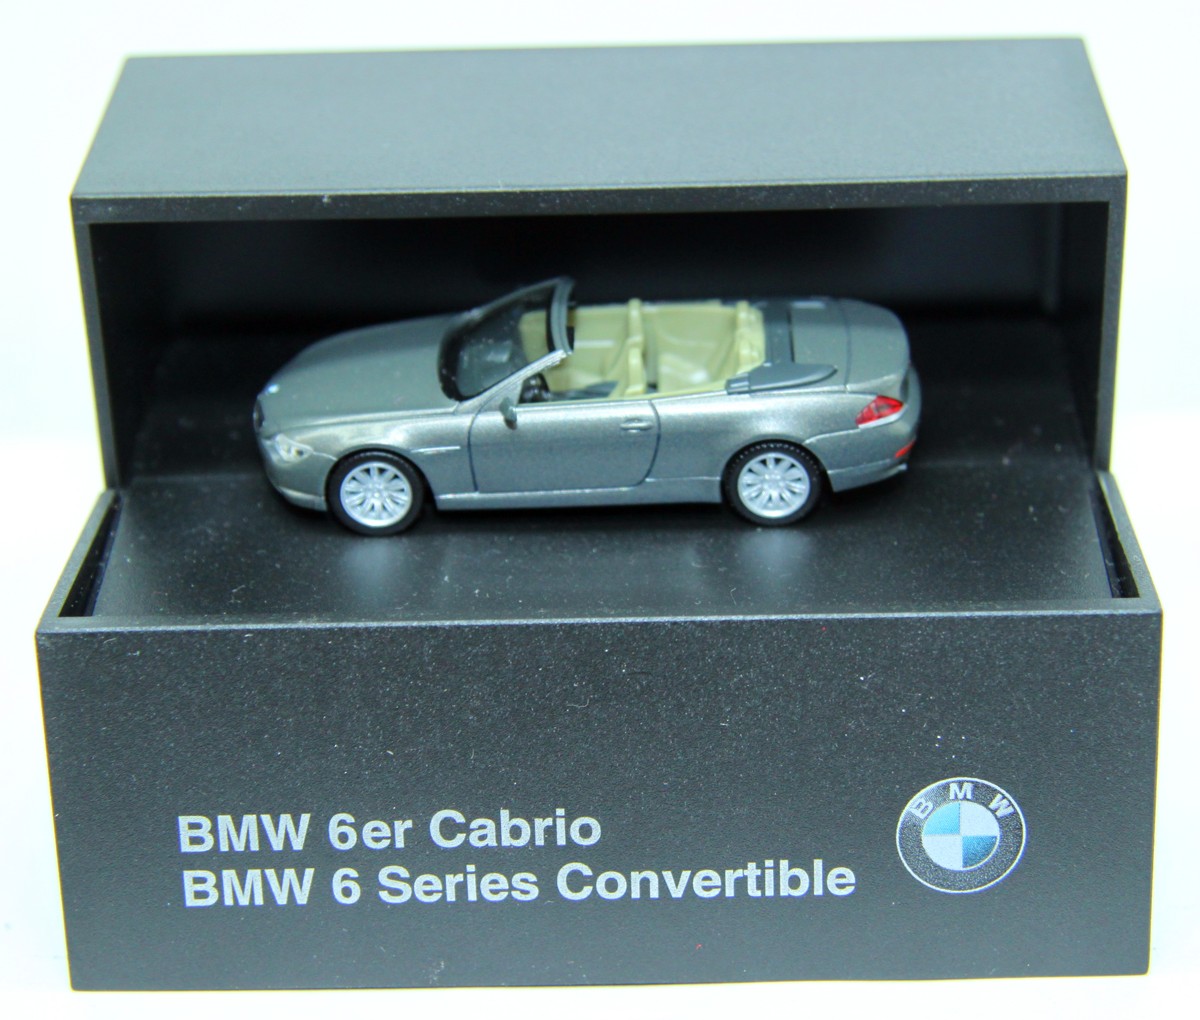 BMW Group, collector's model BMW 6 series convertible for H0 gauge